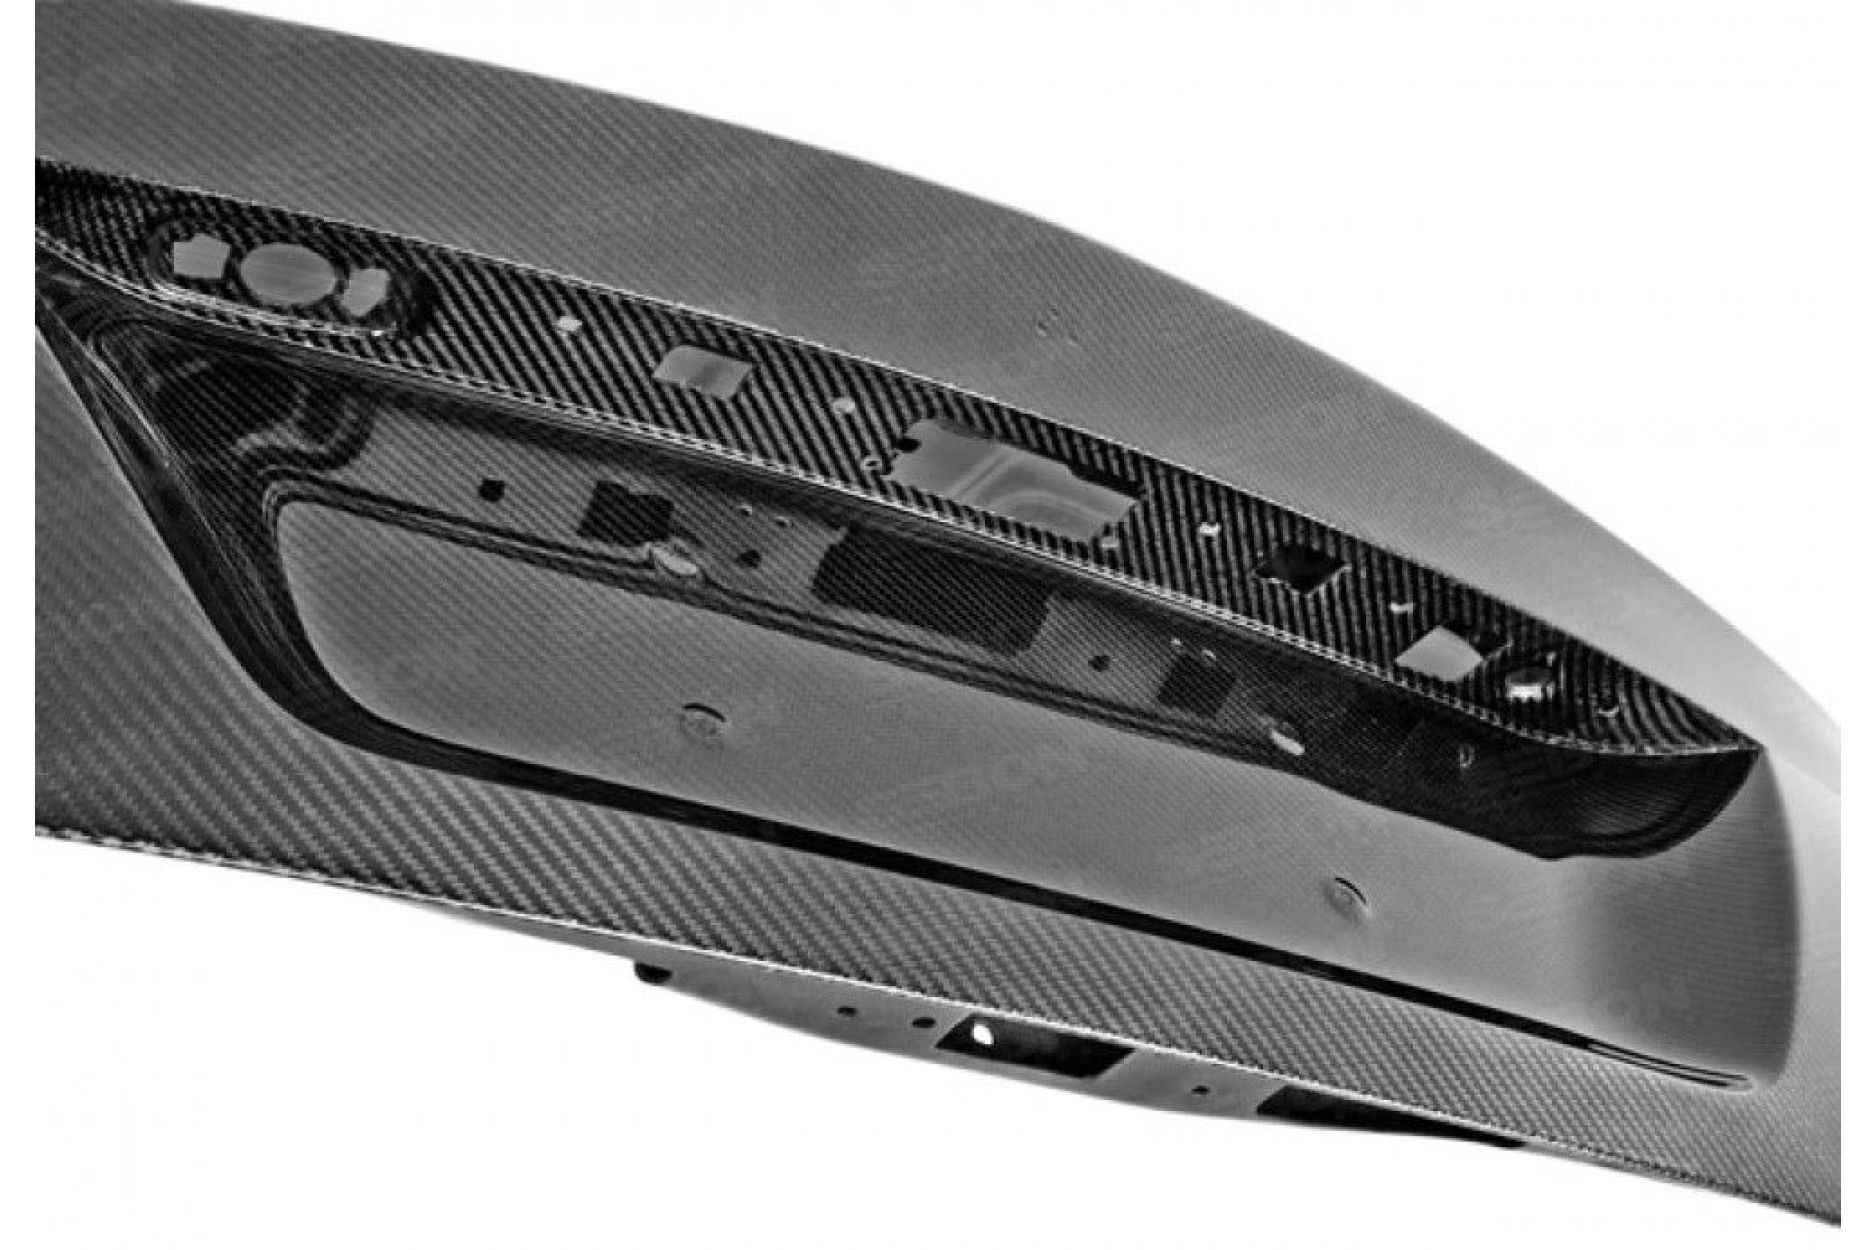 Seibon carbon trunk lid for MERCEDES C-Class W204 and C63 AMG sedan 2012 - 2014 OE-Style (2) 